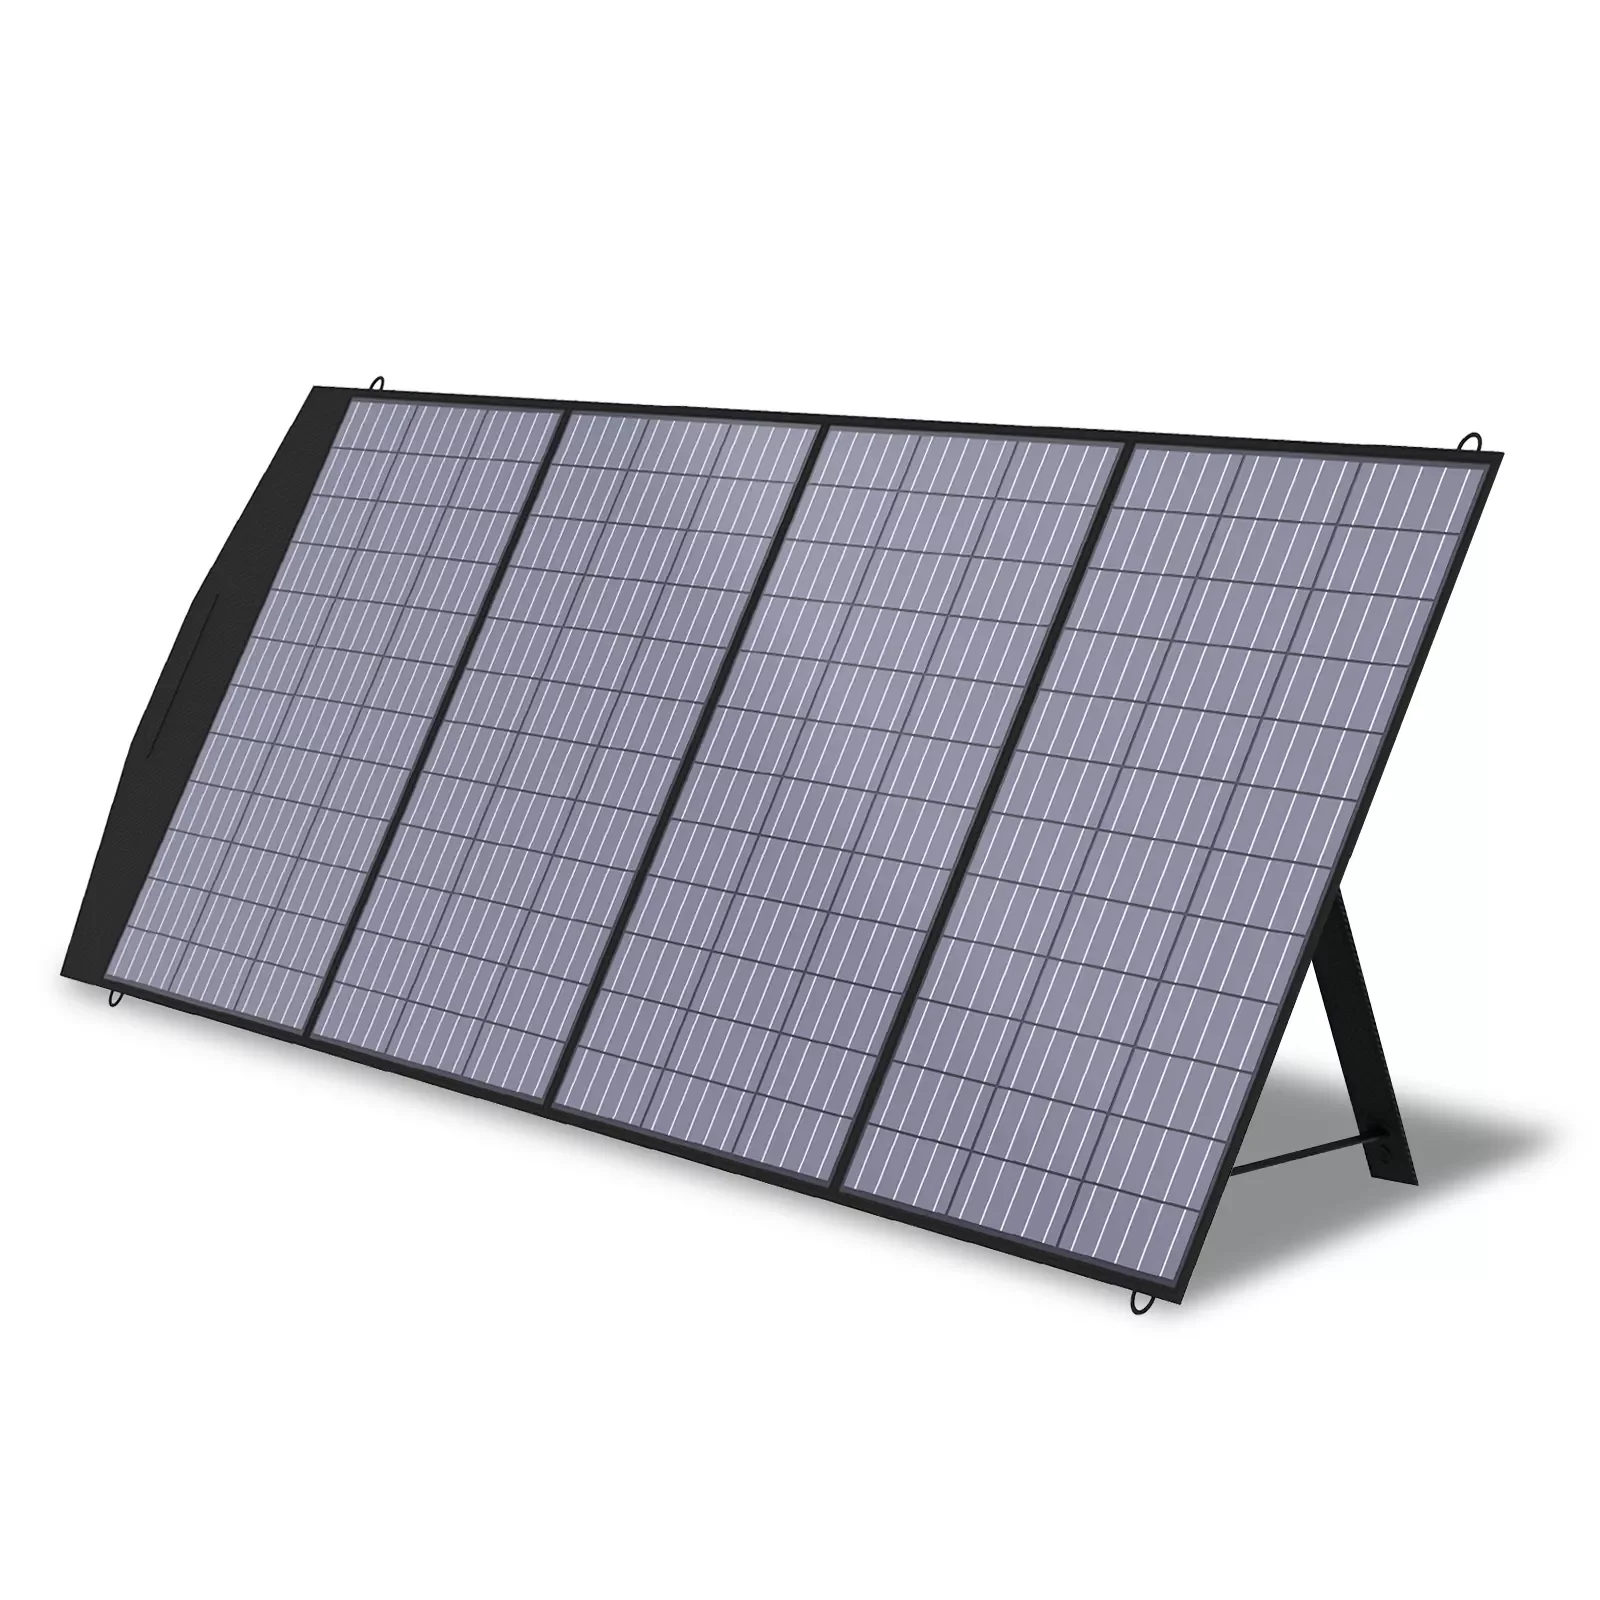 

NEW2023 ALLPOWERS Portable Foldable Solar Panel Charger 18V 200W Solar Panel Kit with MC-4 Output for Laptops, RV, Power Station